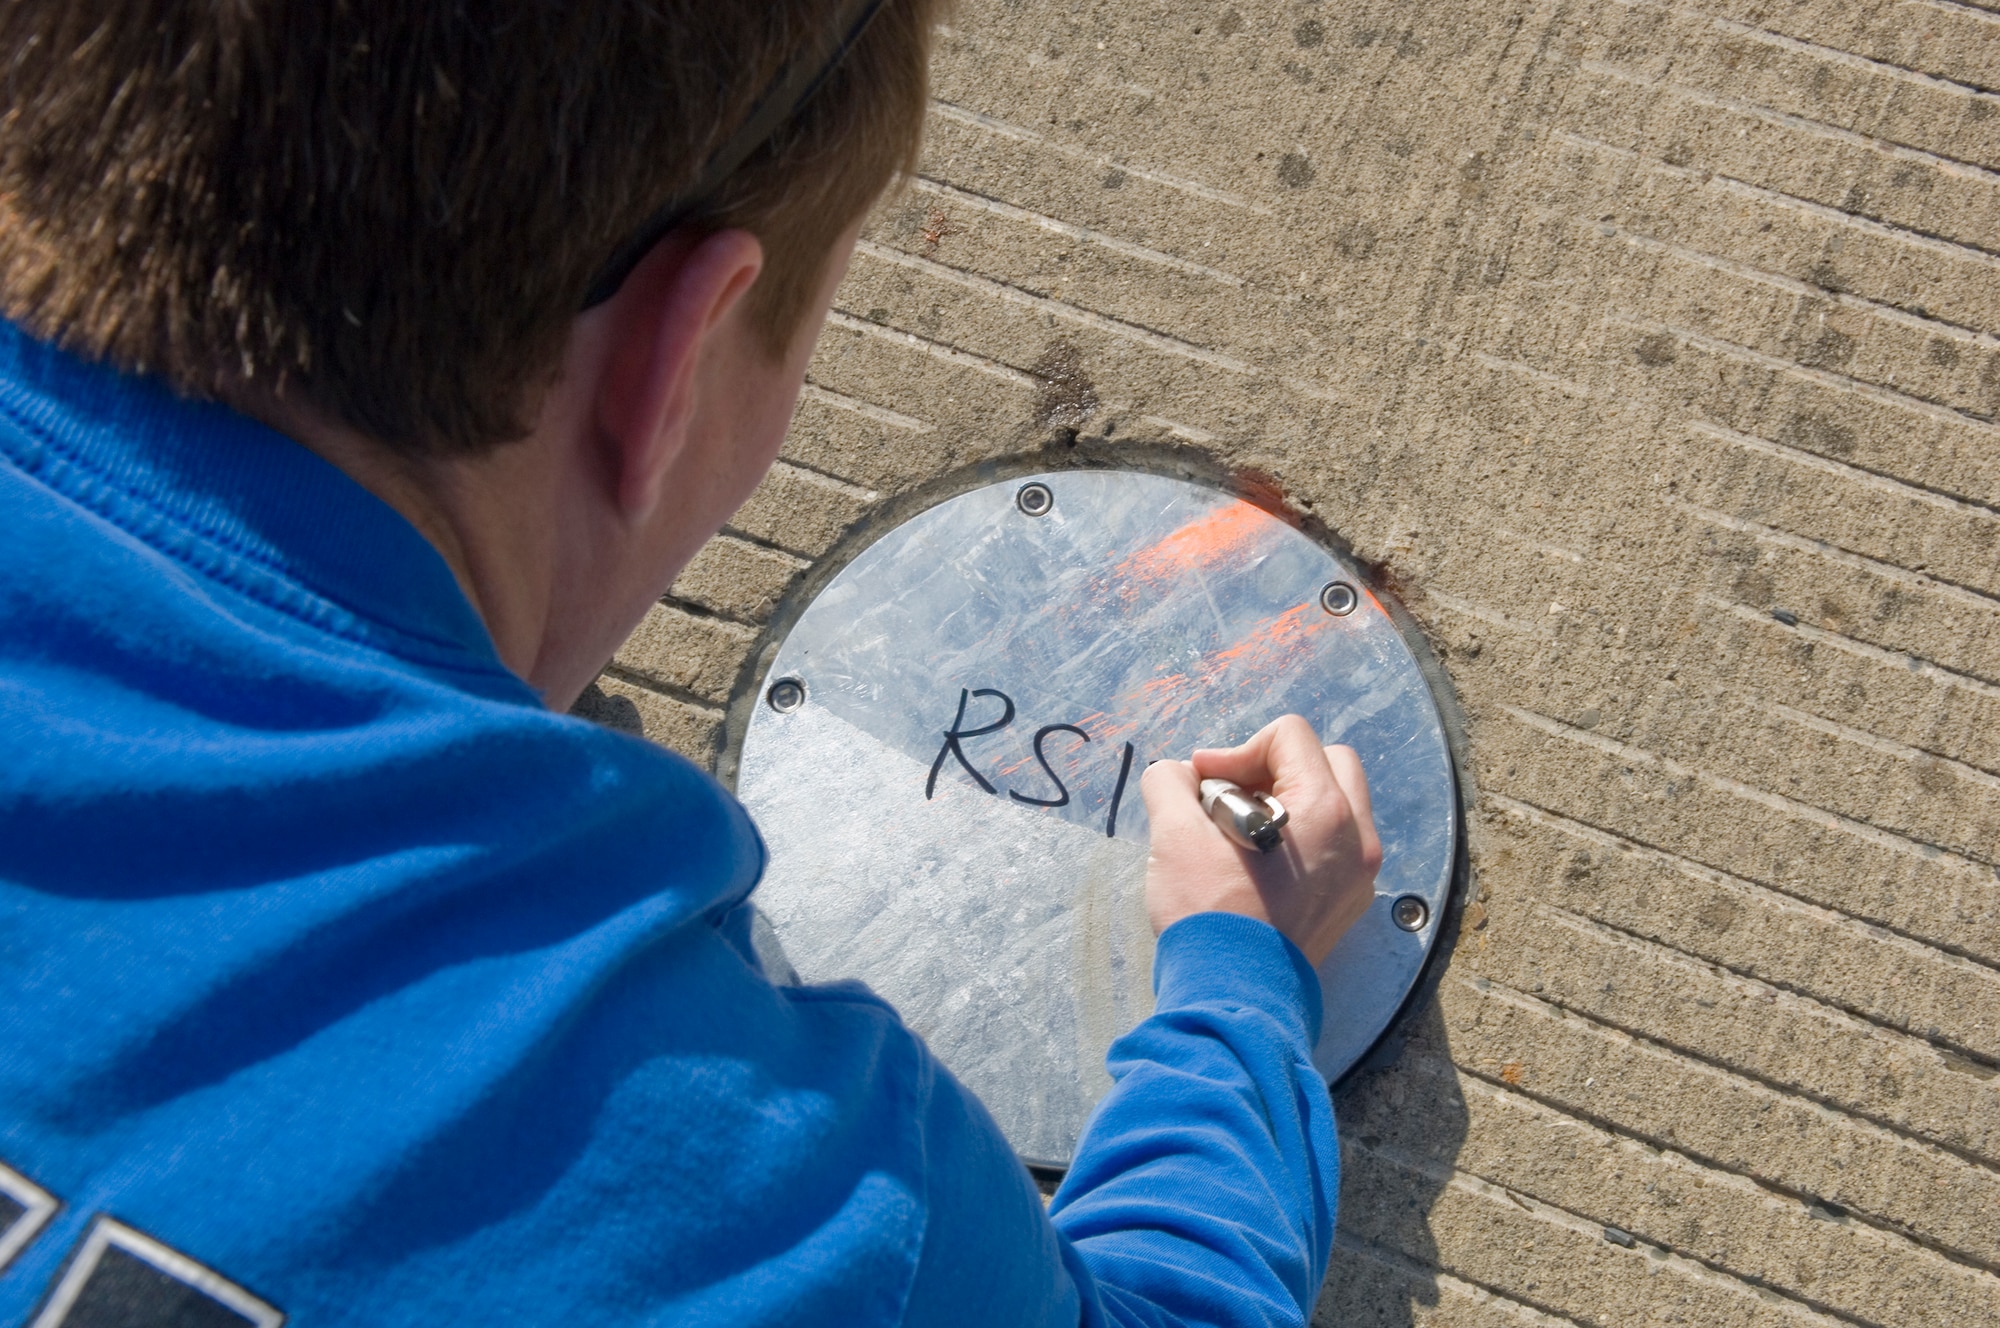 VANDENBERG AIR FORCE BASE, Calif. -- 2nd Lt. Mike Kelly, of the 30th Civil Engineer Squadron, signs a metal plate to signify it has passed inspection during installation on the flightline at here Saturday, May 8, 2010. Construction crews replaced the metal plates to ensure the X-37B has a safe landing. (U.S. Air Force photo by Staff Sgt. Levi Riendeau)
